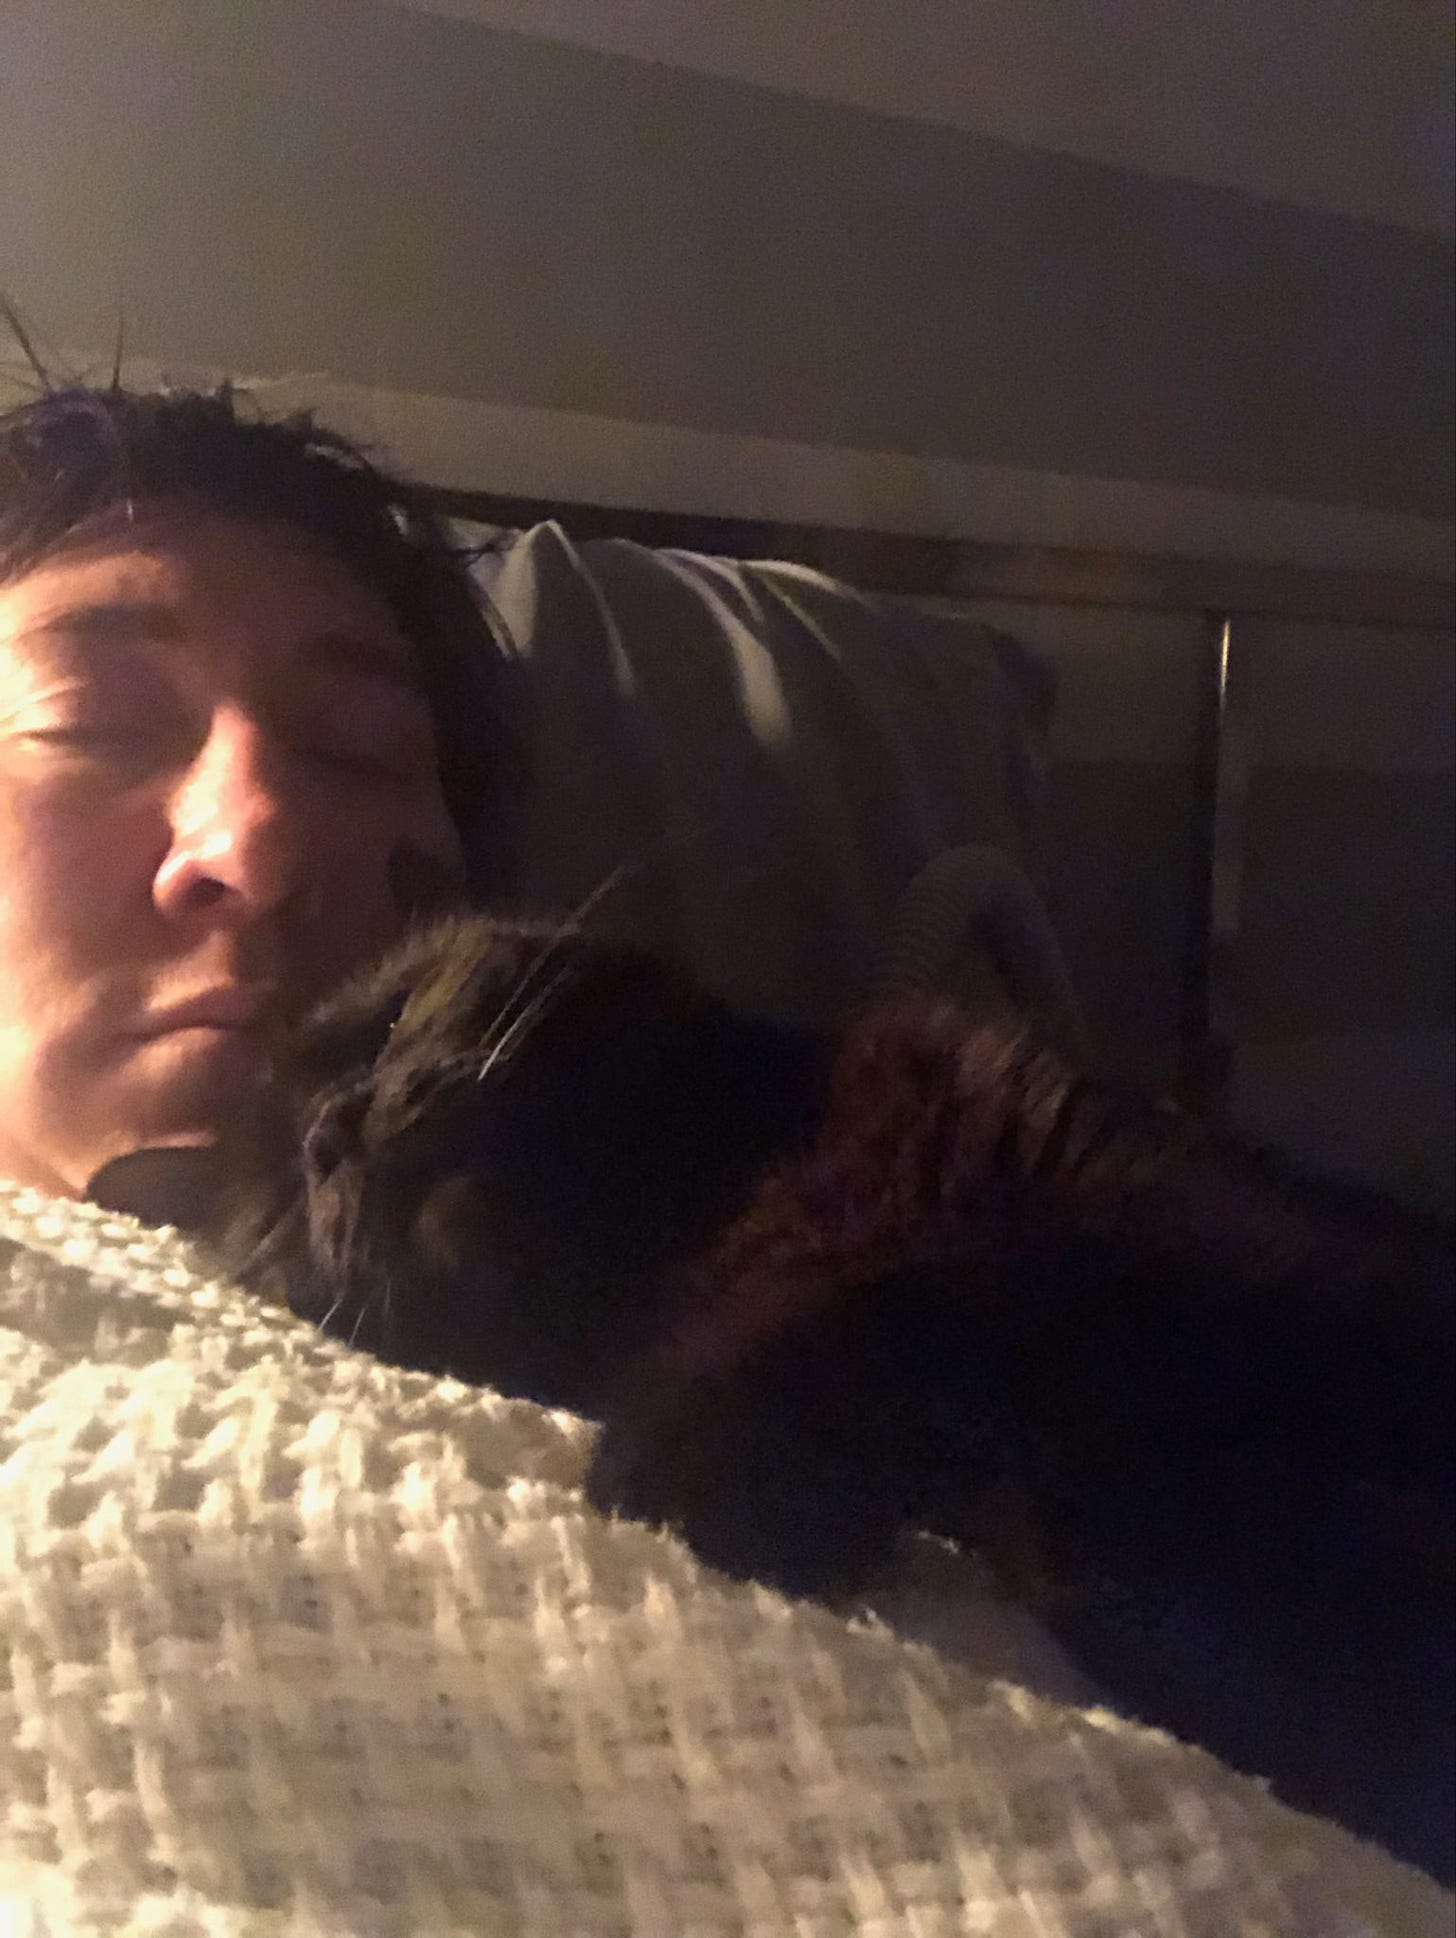 A woman snuggled up with a black cat over a white blanket